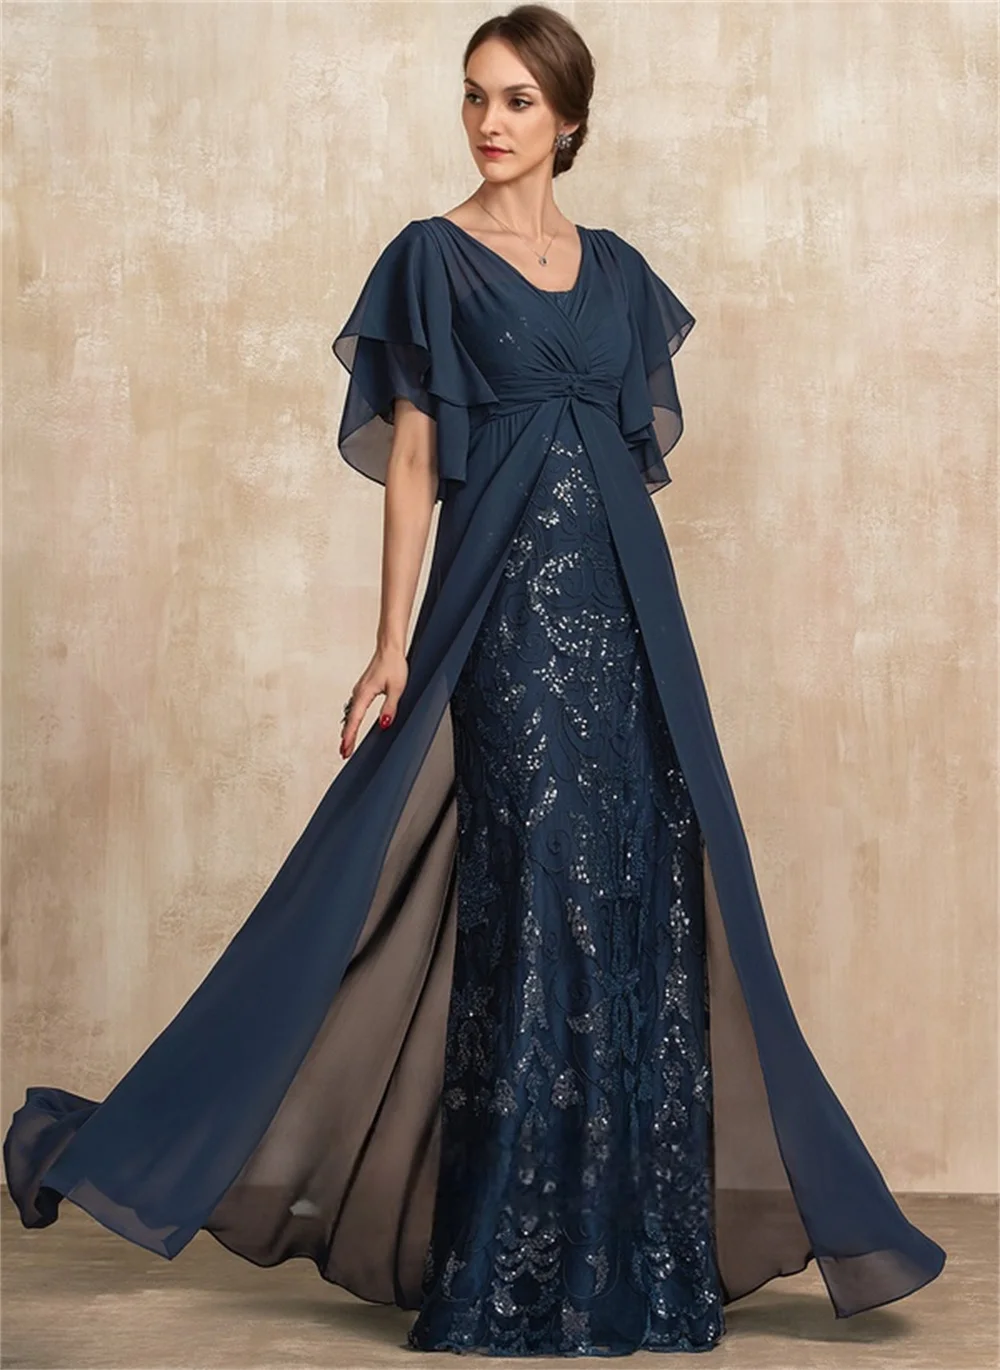 Sheath/Column V-Neck Floor-Length Chiffon Lace Mother Of The Bride Dresses With Ruffle Sequins 2022 Temperament Evening A-Line